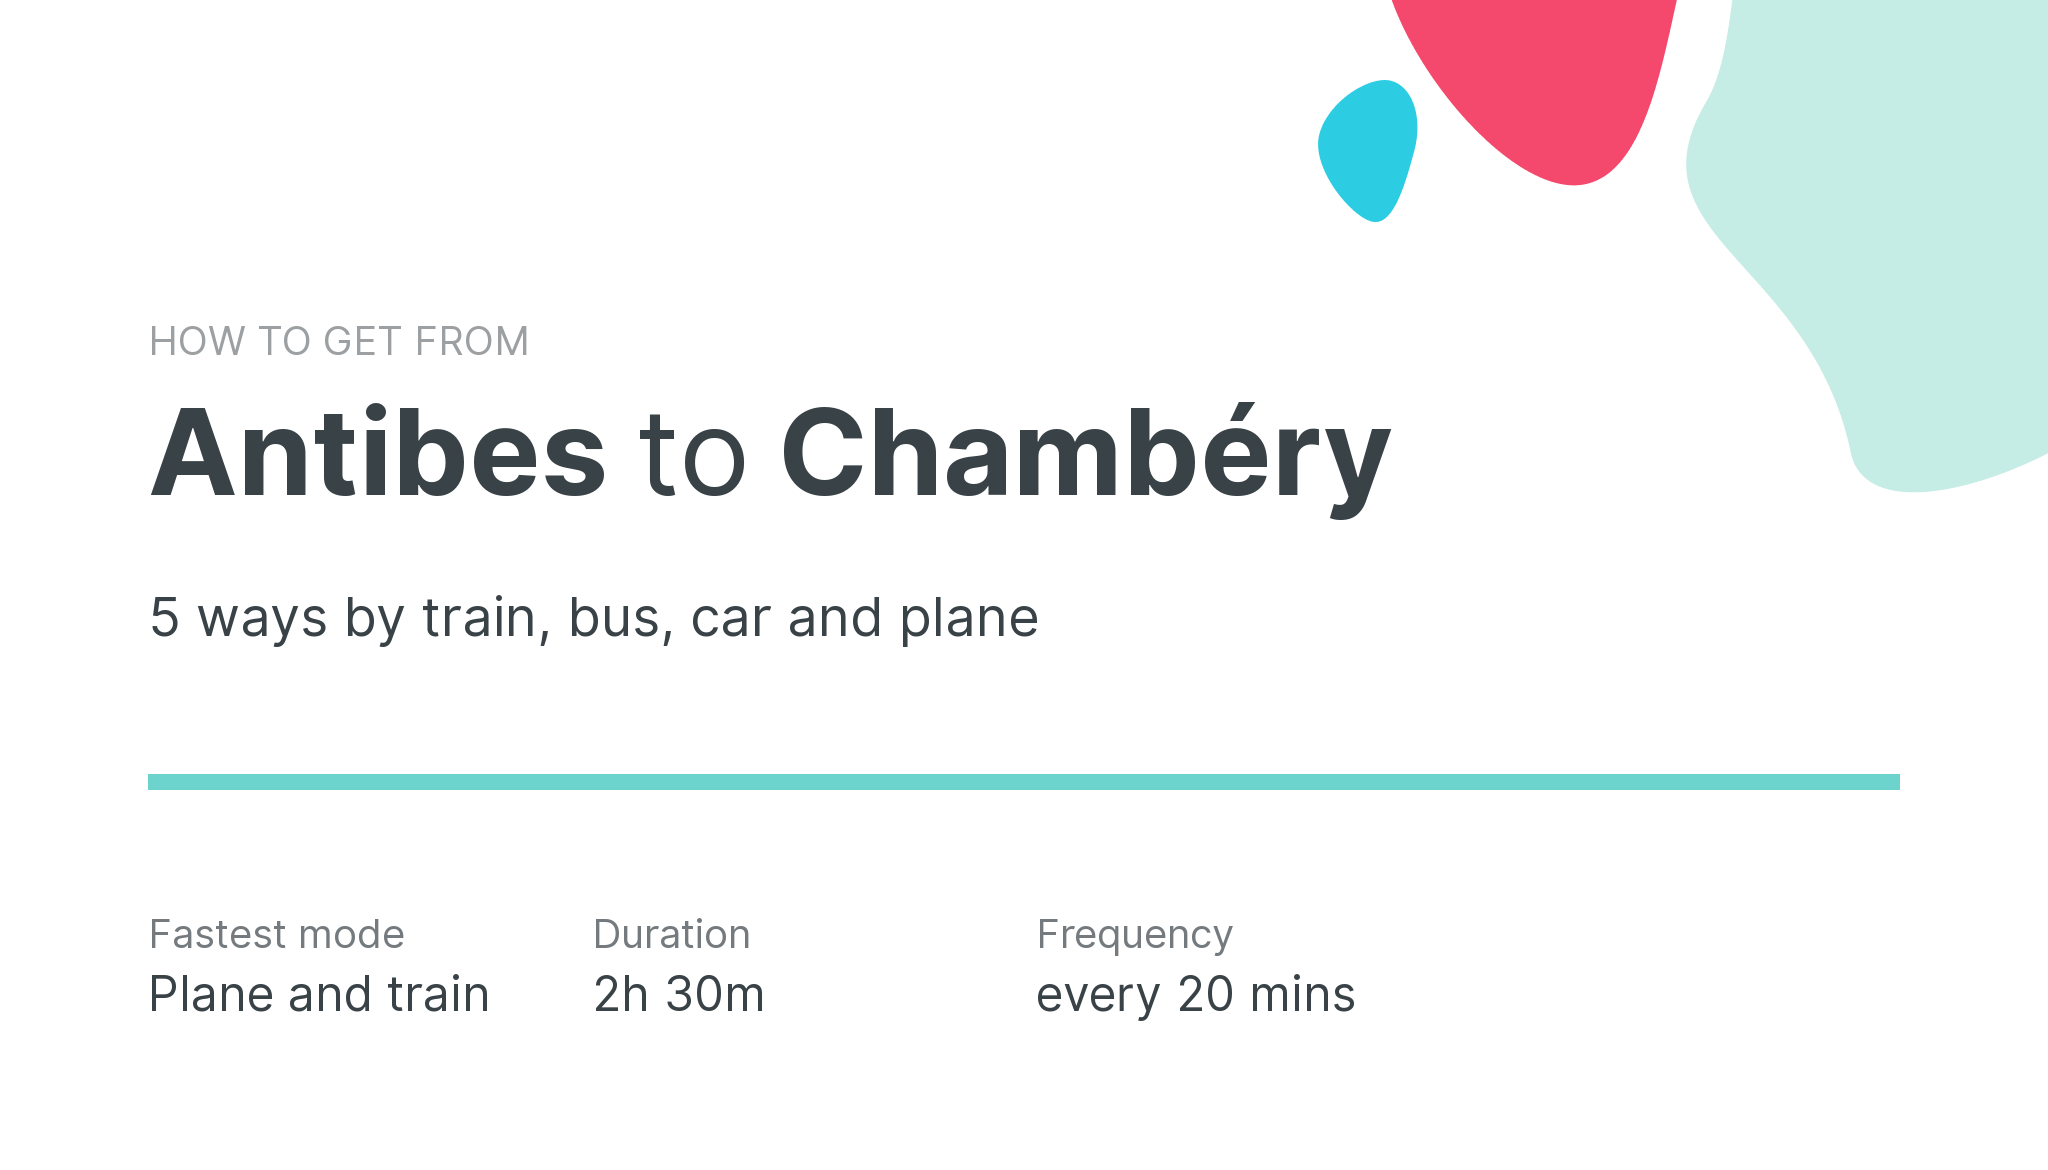 How do I get from Antibes to Chambéry